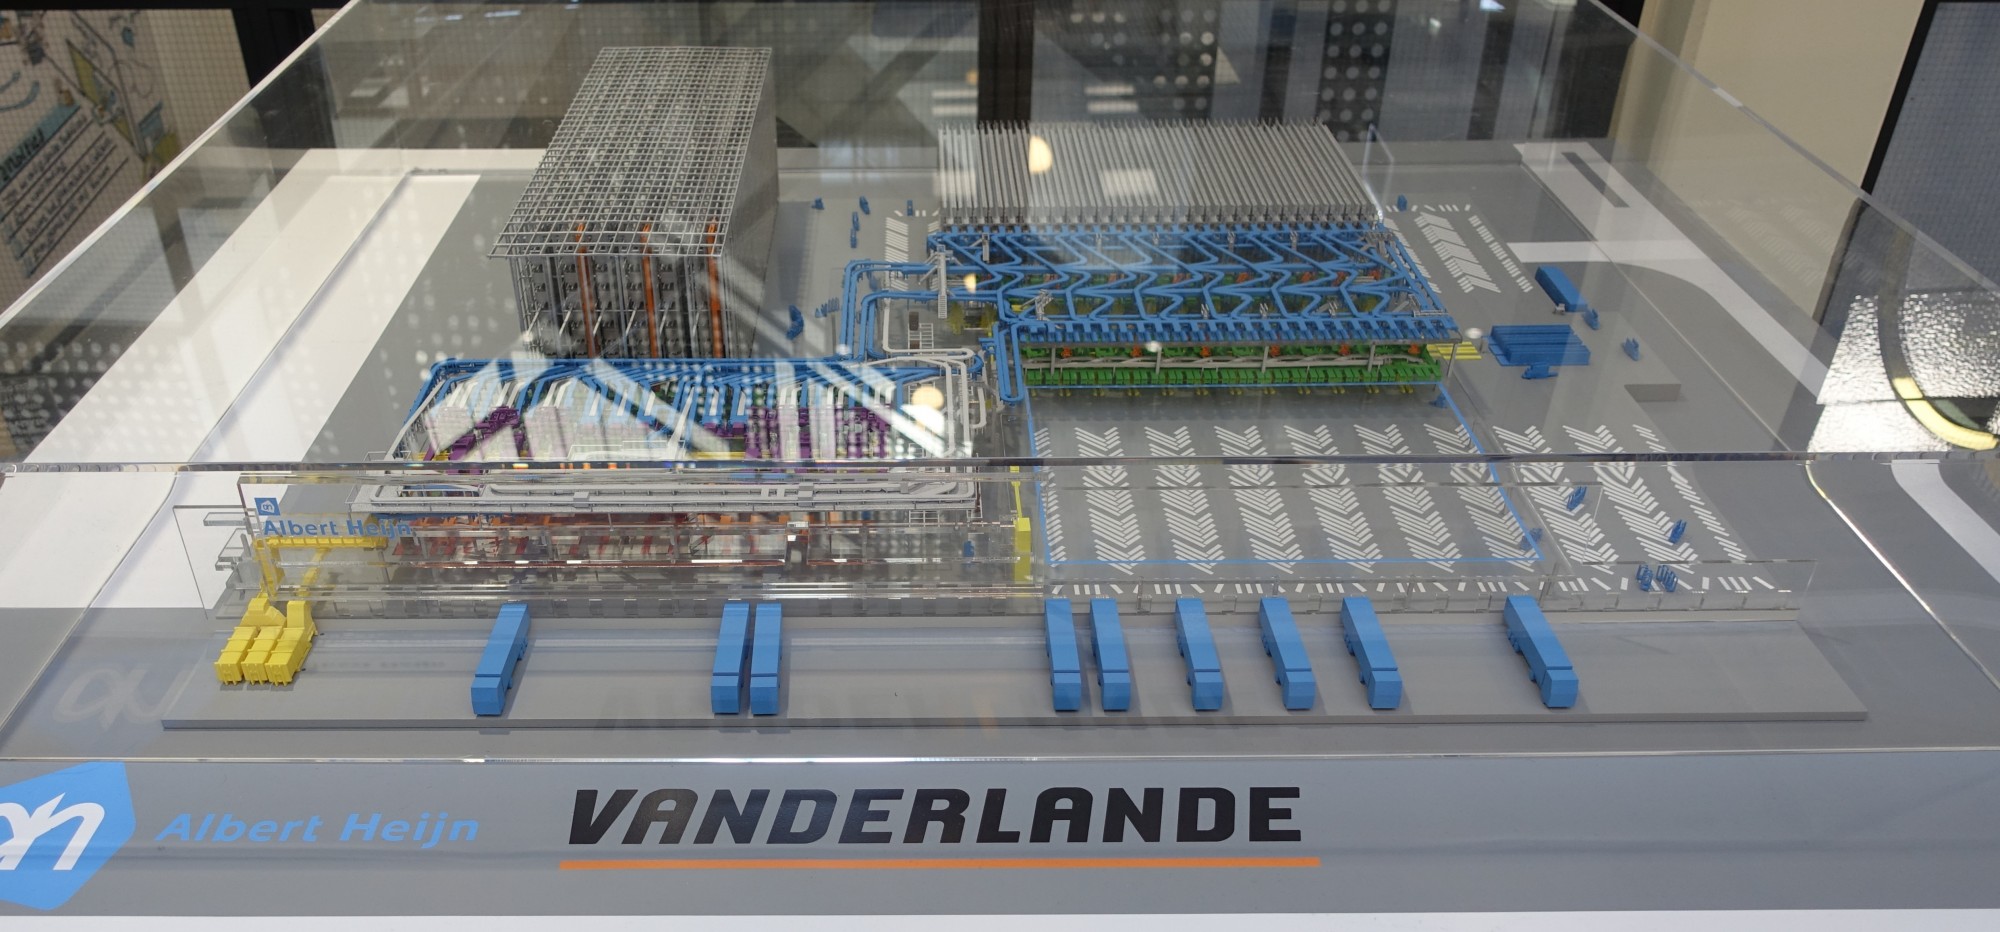 New Albert Heijn Distribution Center Represented by Giant 3D-Printed Scale Model